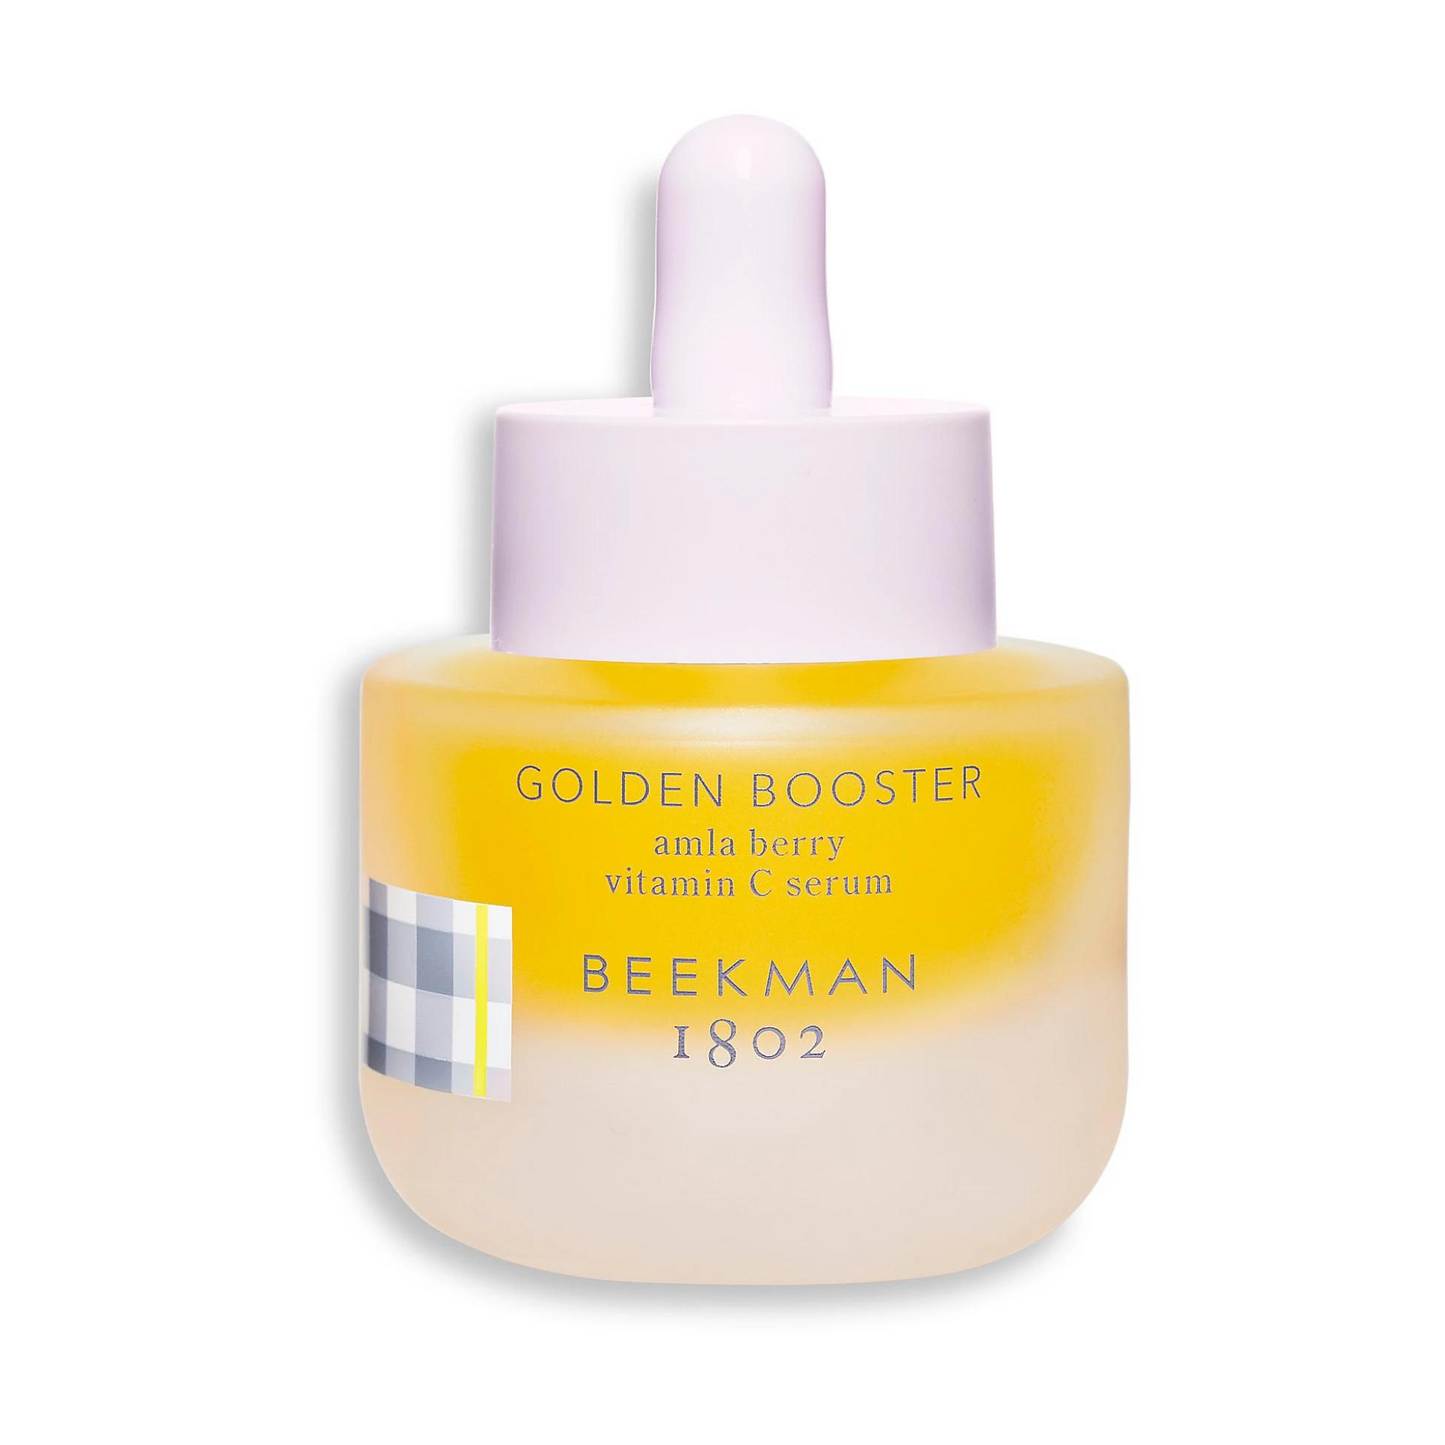 Primary Image of Beekman 1802 Golden Booster (0.5 fl oz)